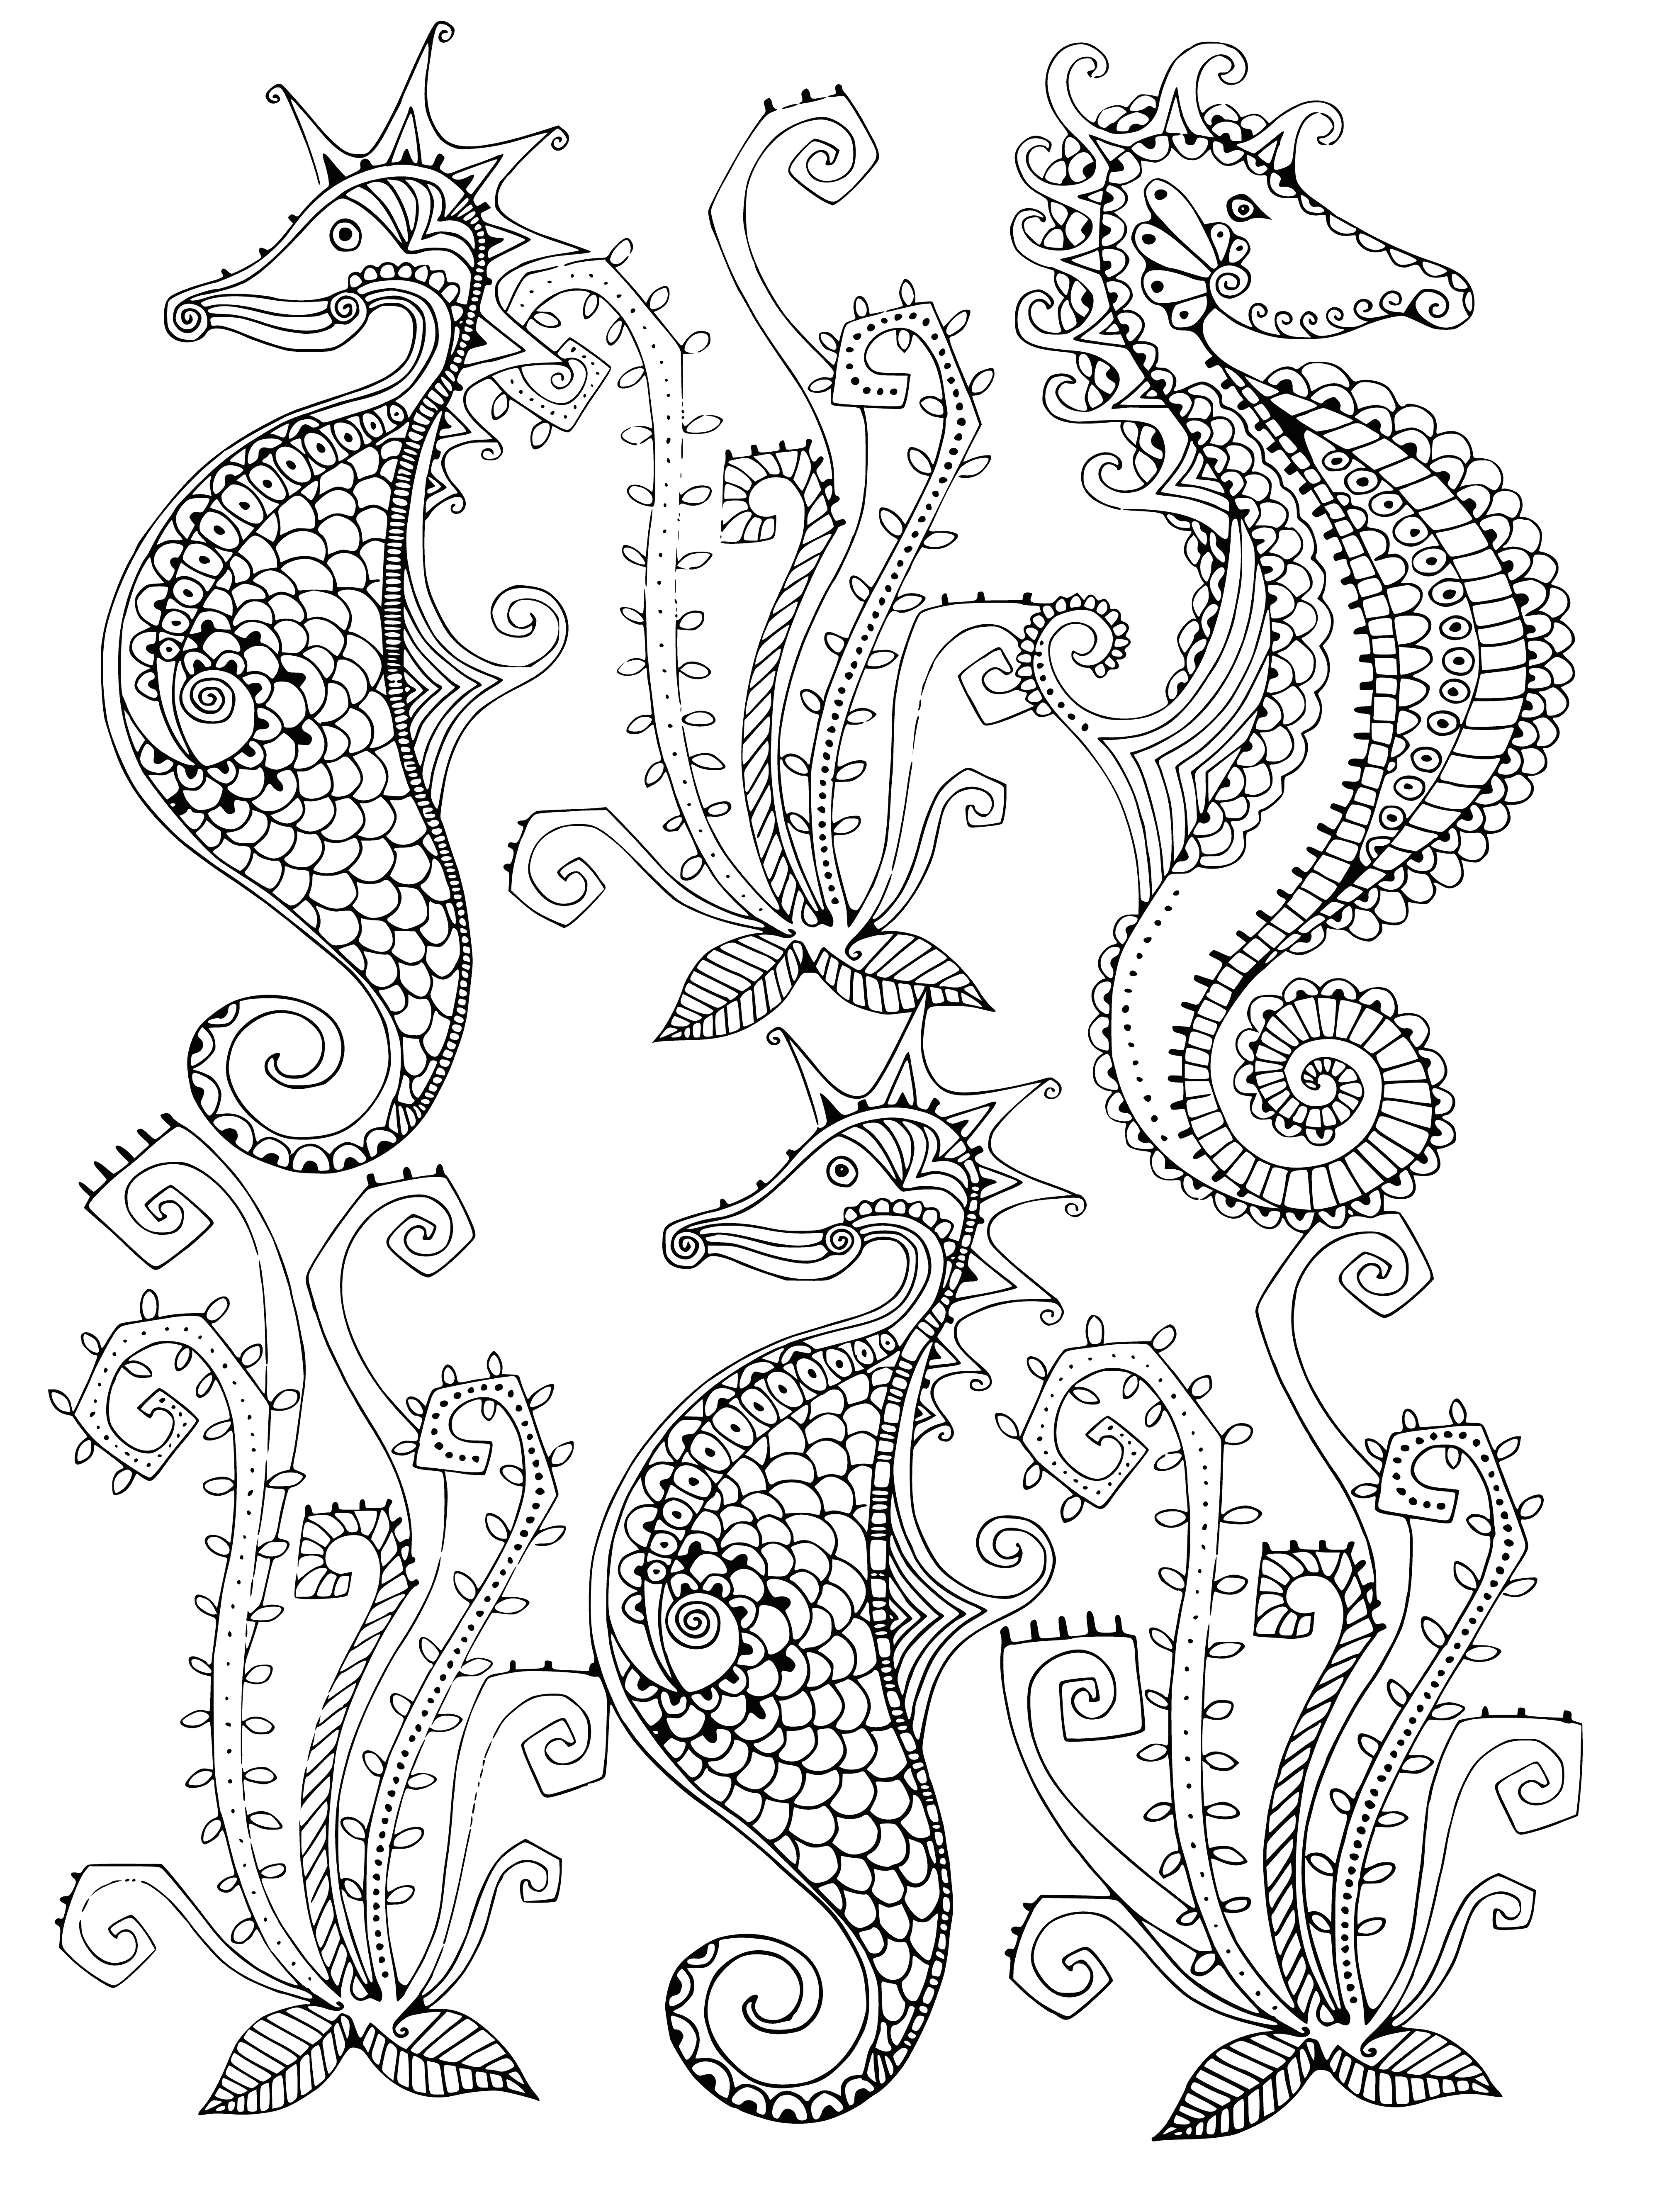 Sea Horses coloring page